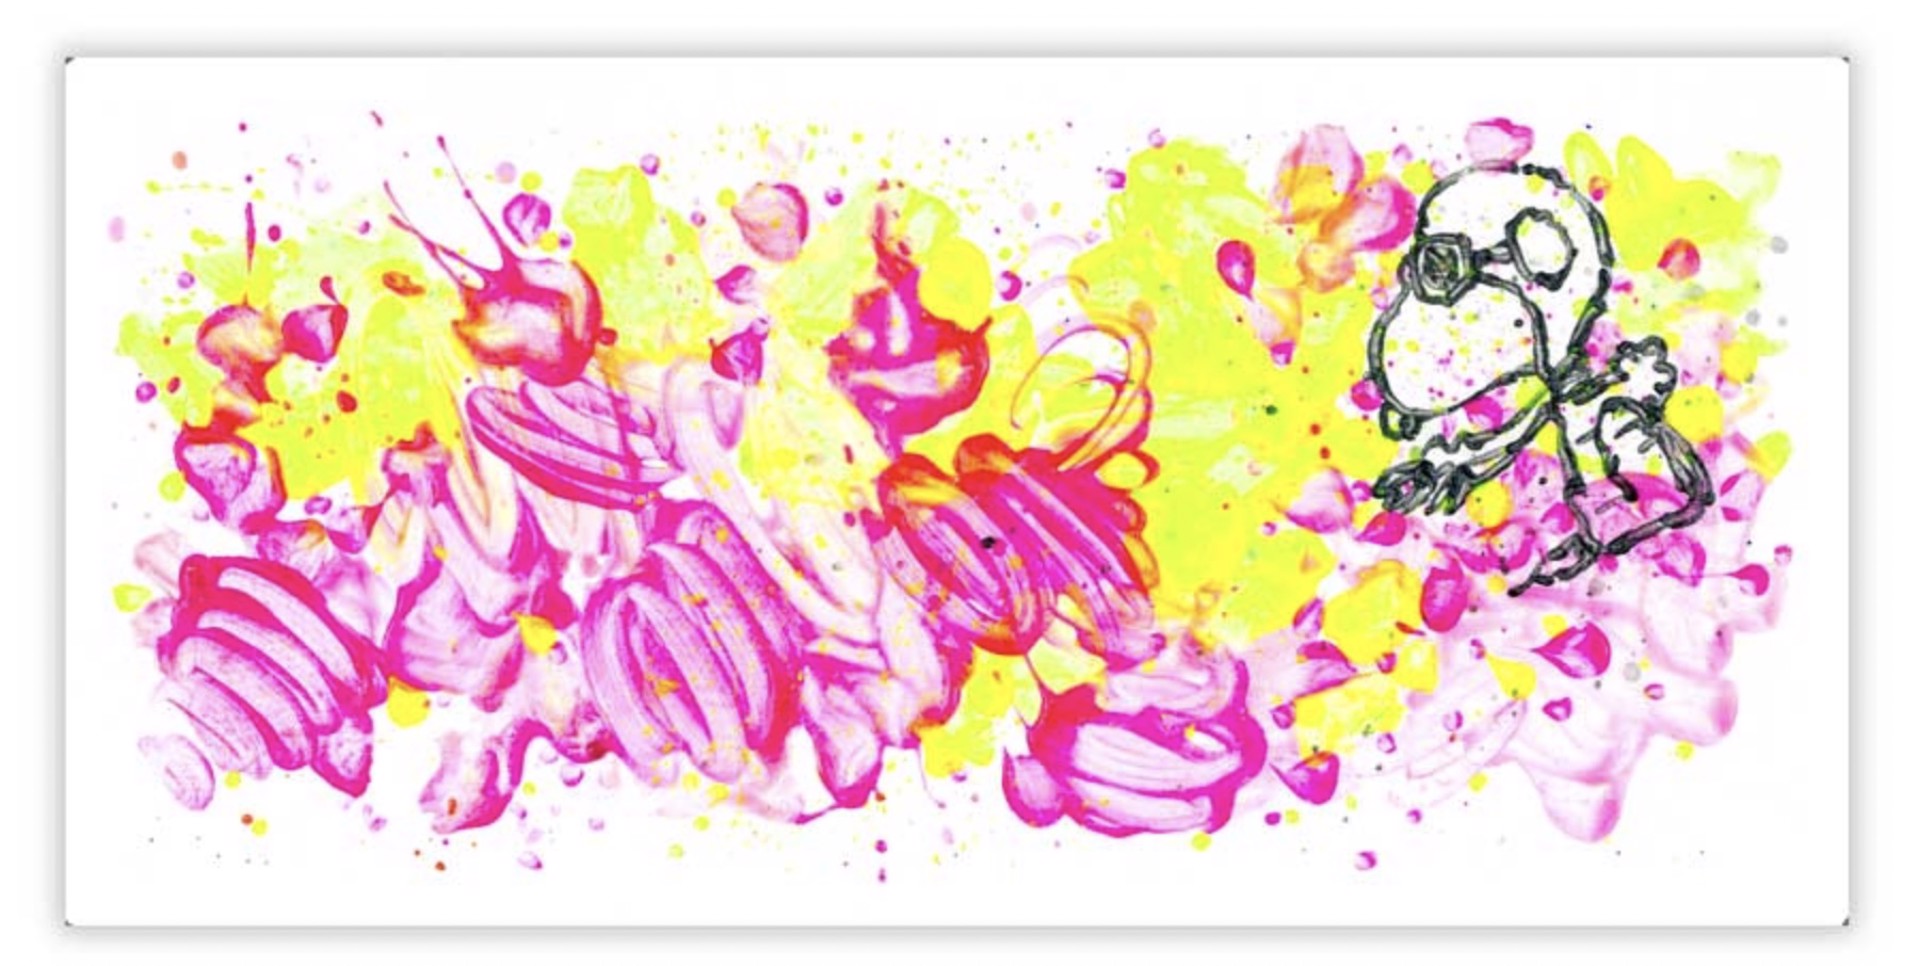 Partly Cloudy 6:45 Morning Fly by Tom Everhart